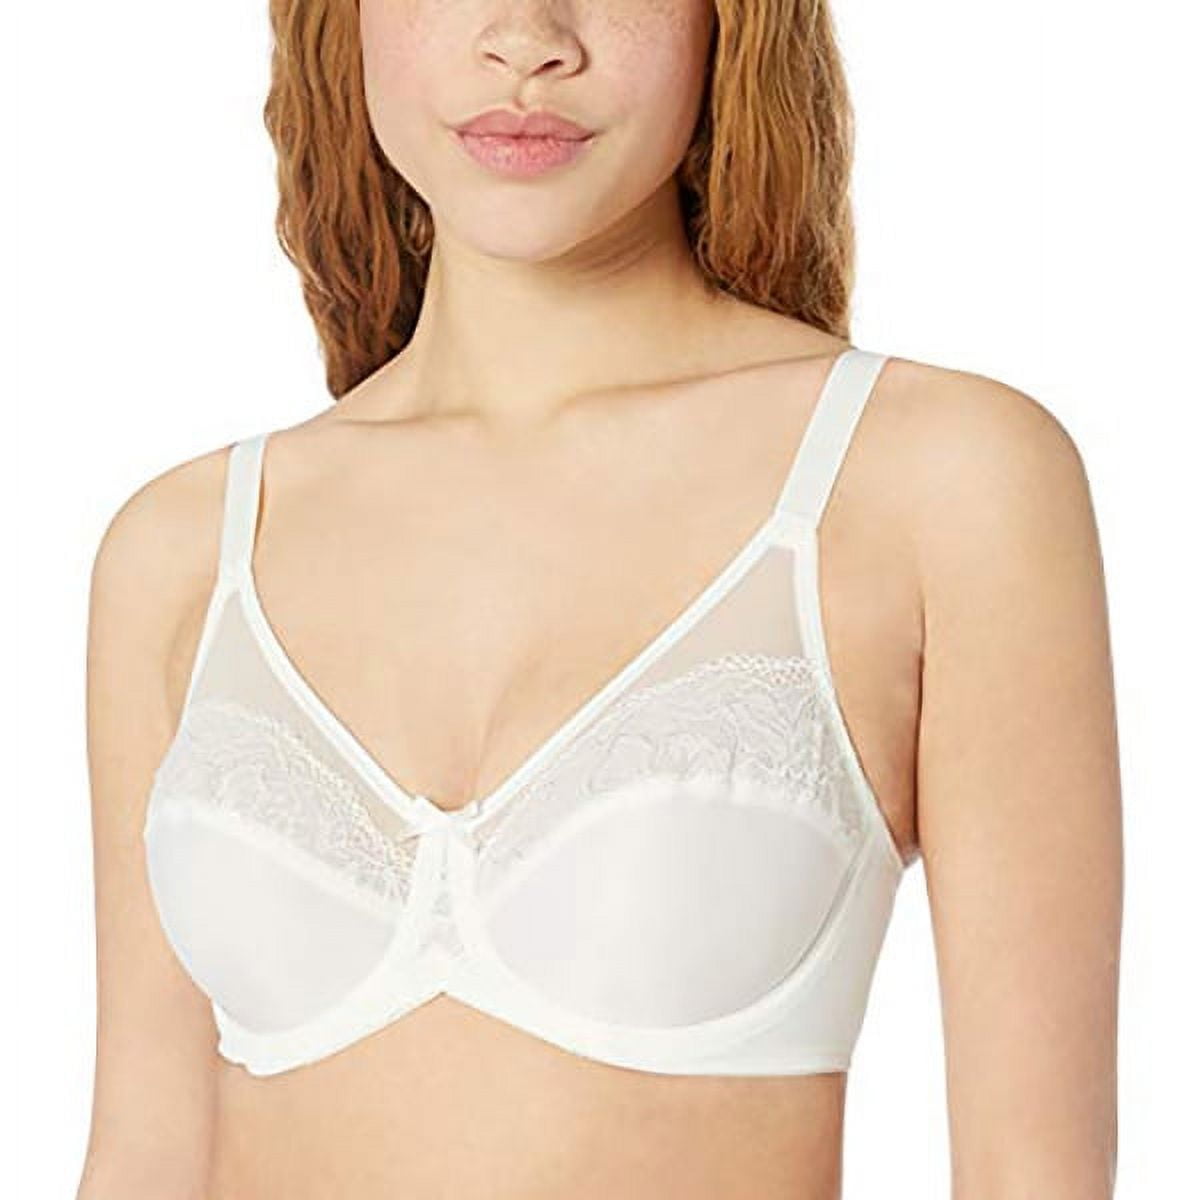 Bali Lilyette Minimizer Bra, Lacey Underwire Bra with Full-Coverage &  Natural Support, Underwire Bra for Everyday We